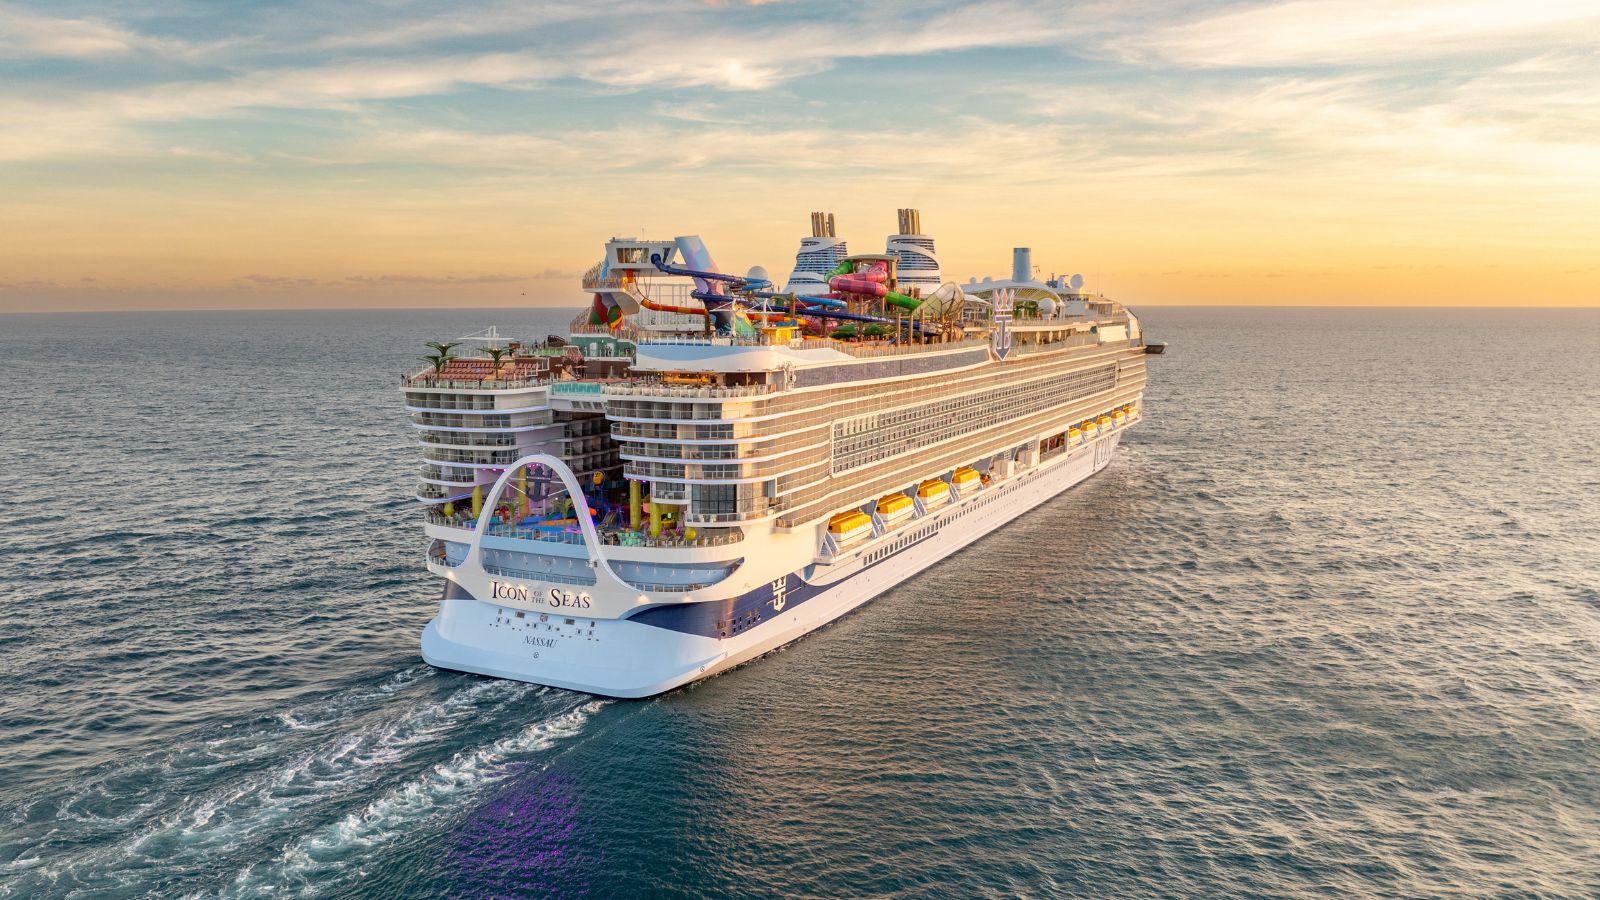 Let’s Discover the World’s Top 11 Current Largest Cruise Ships In the World. If you’re searching for information on the ... <p class="read-more-container"><a title="Largest Cruise Ships In the World" class="read-more button" href="https://cruisingkids.co.uk/largest-cruise-ships-in-the-world/#more-14890">Read more</a></p>